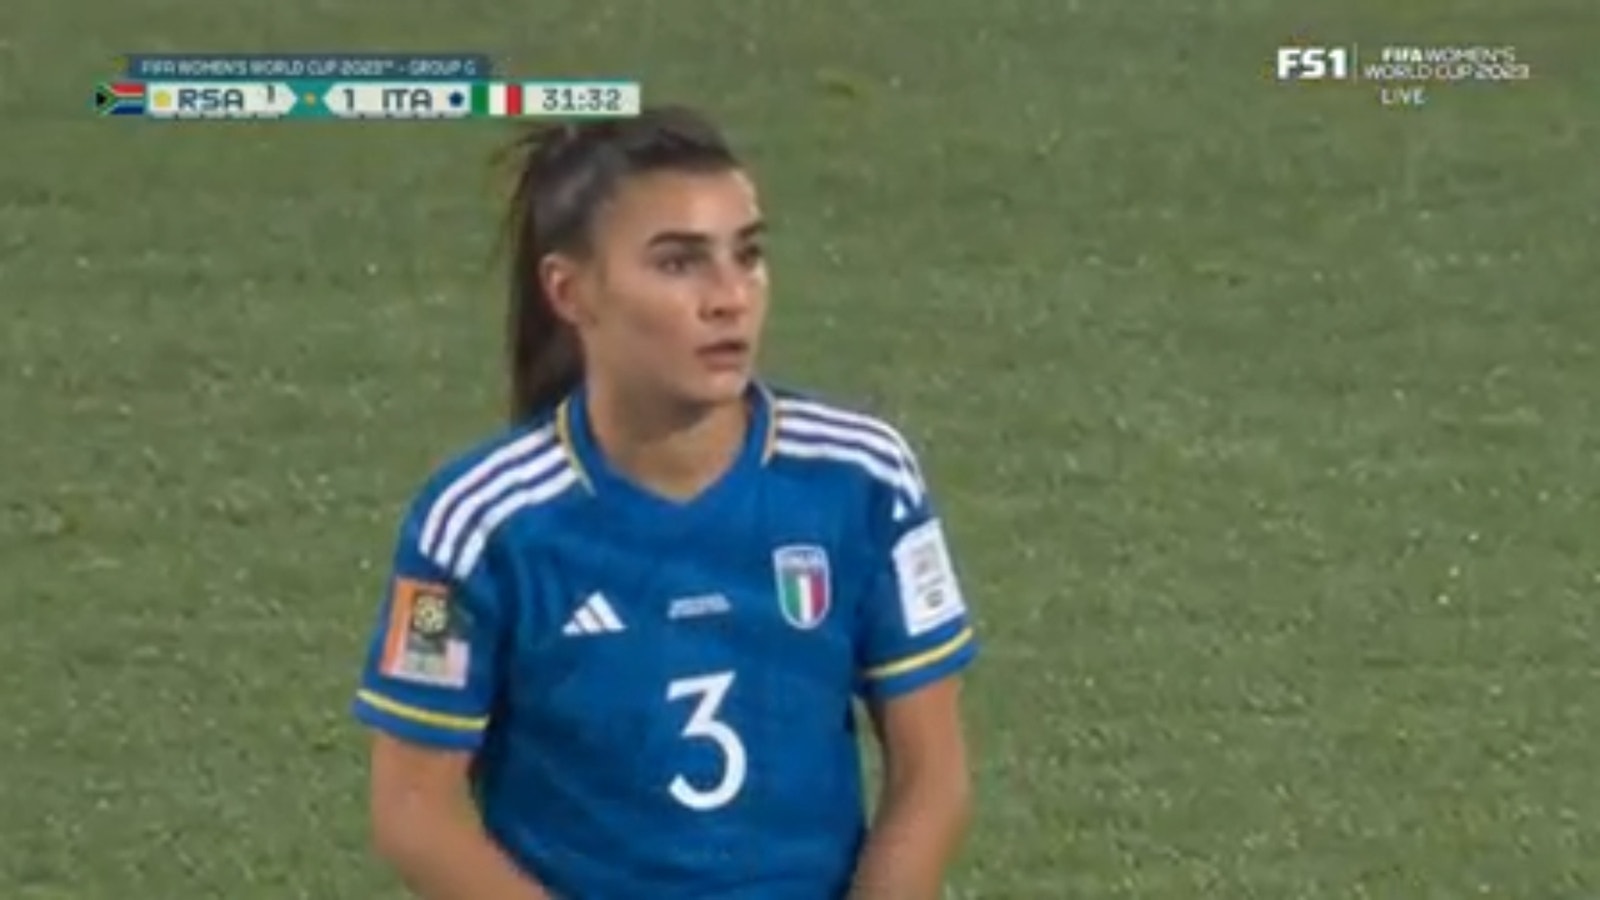 Italy's Benedetta Orsi scores an own goal in 32'